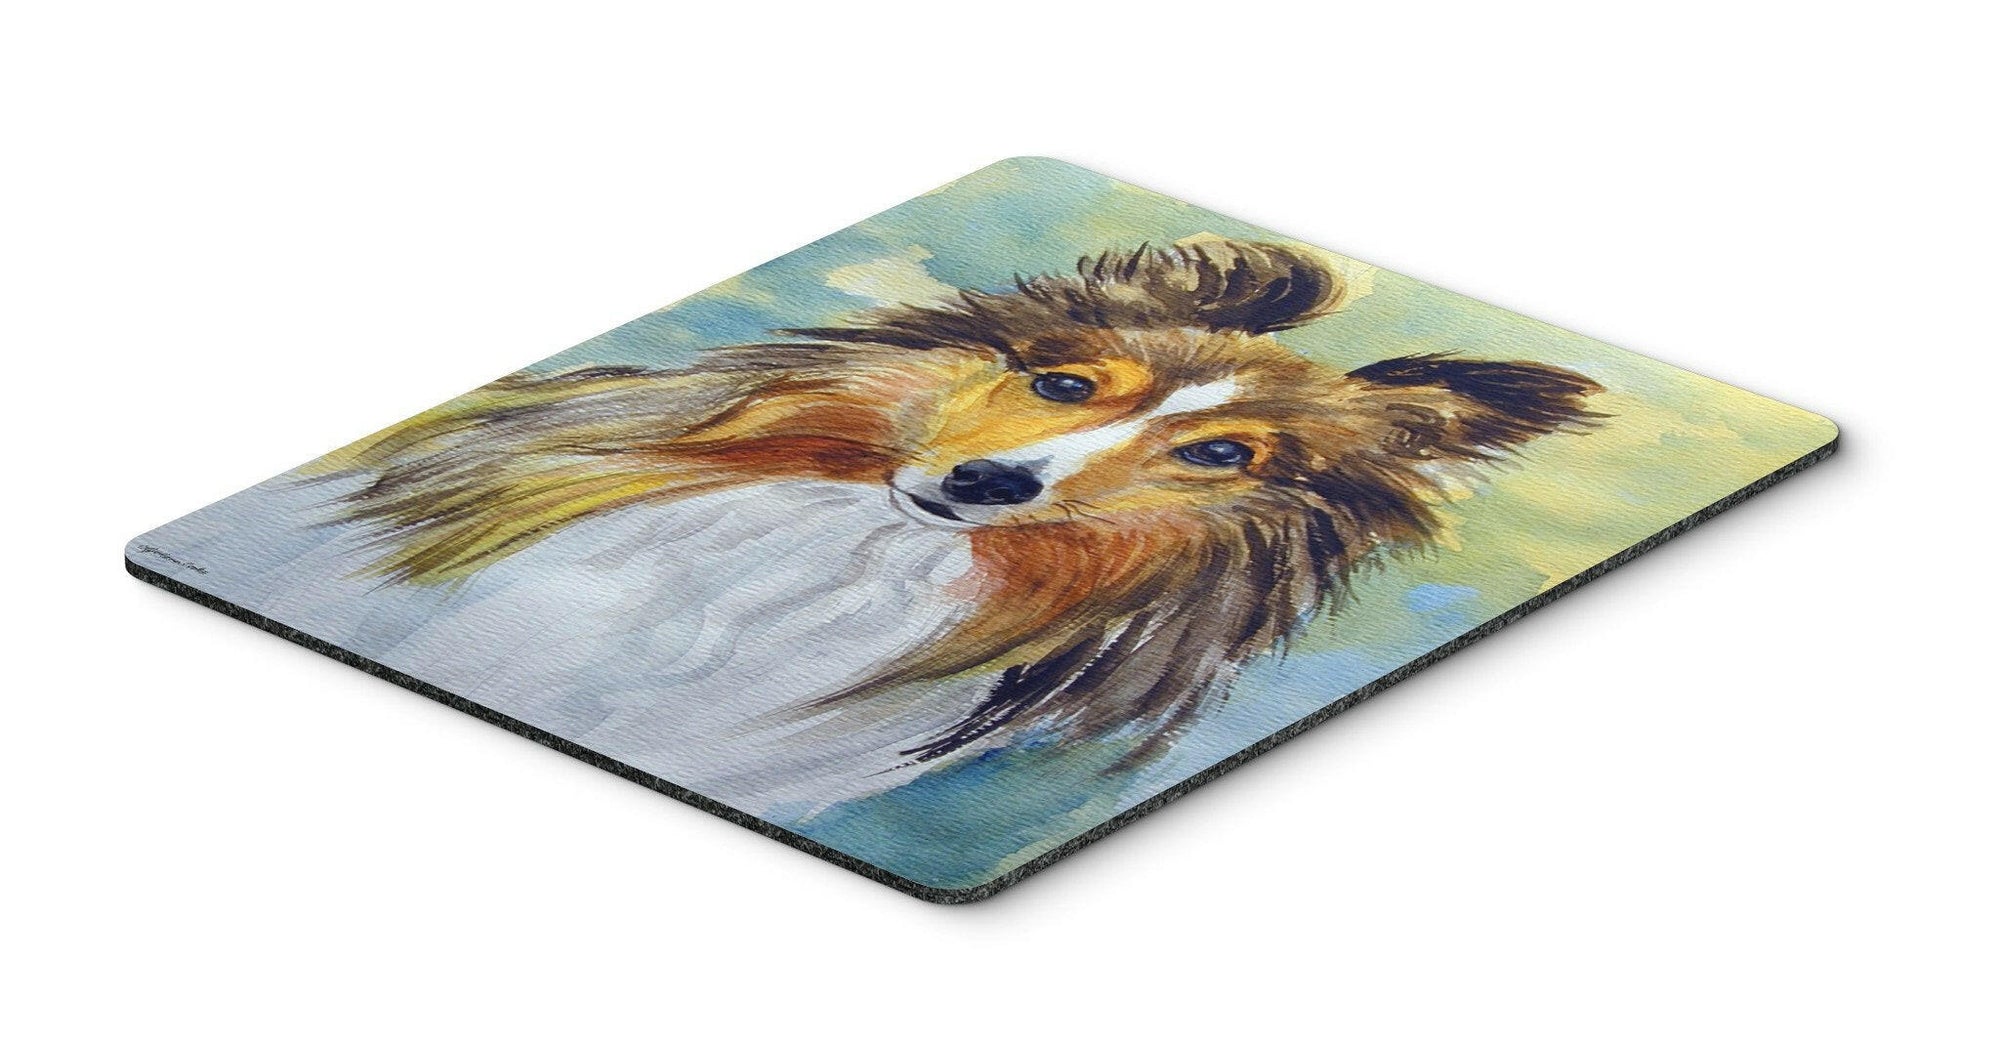 Sheltie Toby Mouse Pad, Hot Pad or Trivet 7397MP by Caroline's Treasures